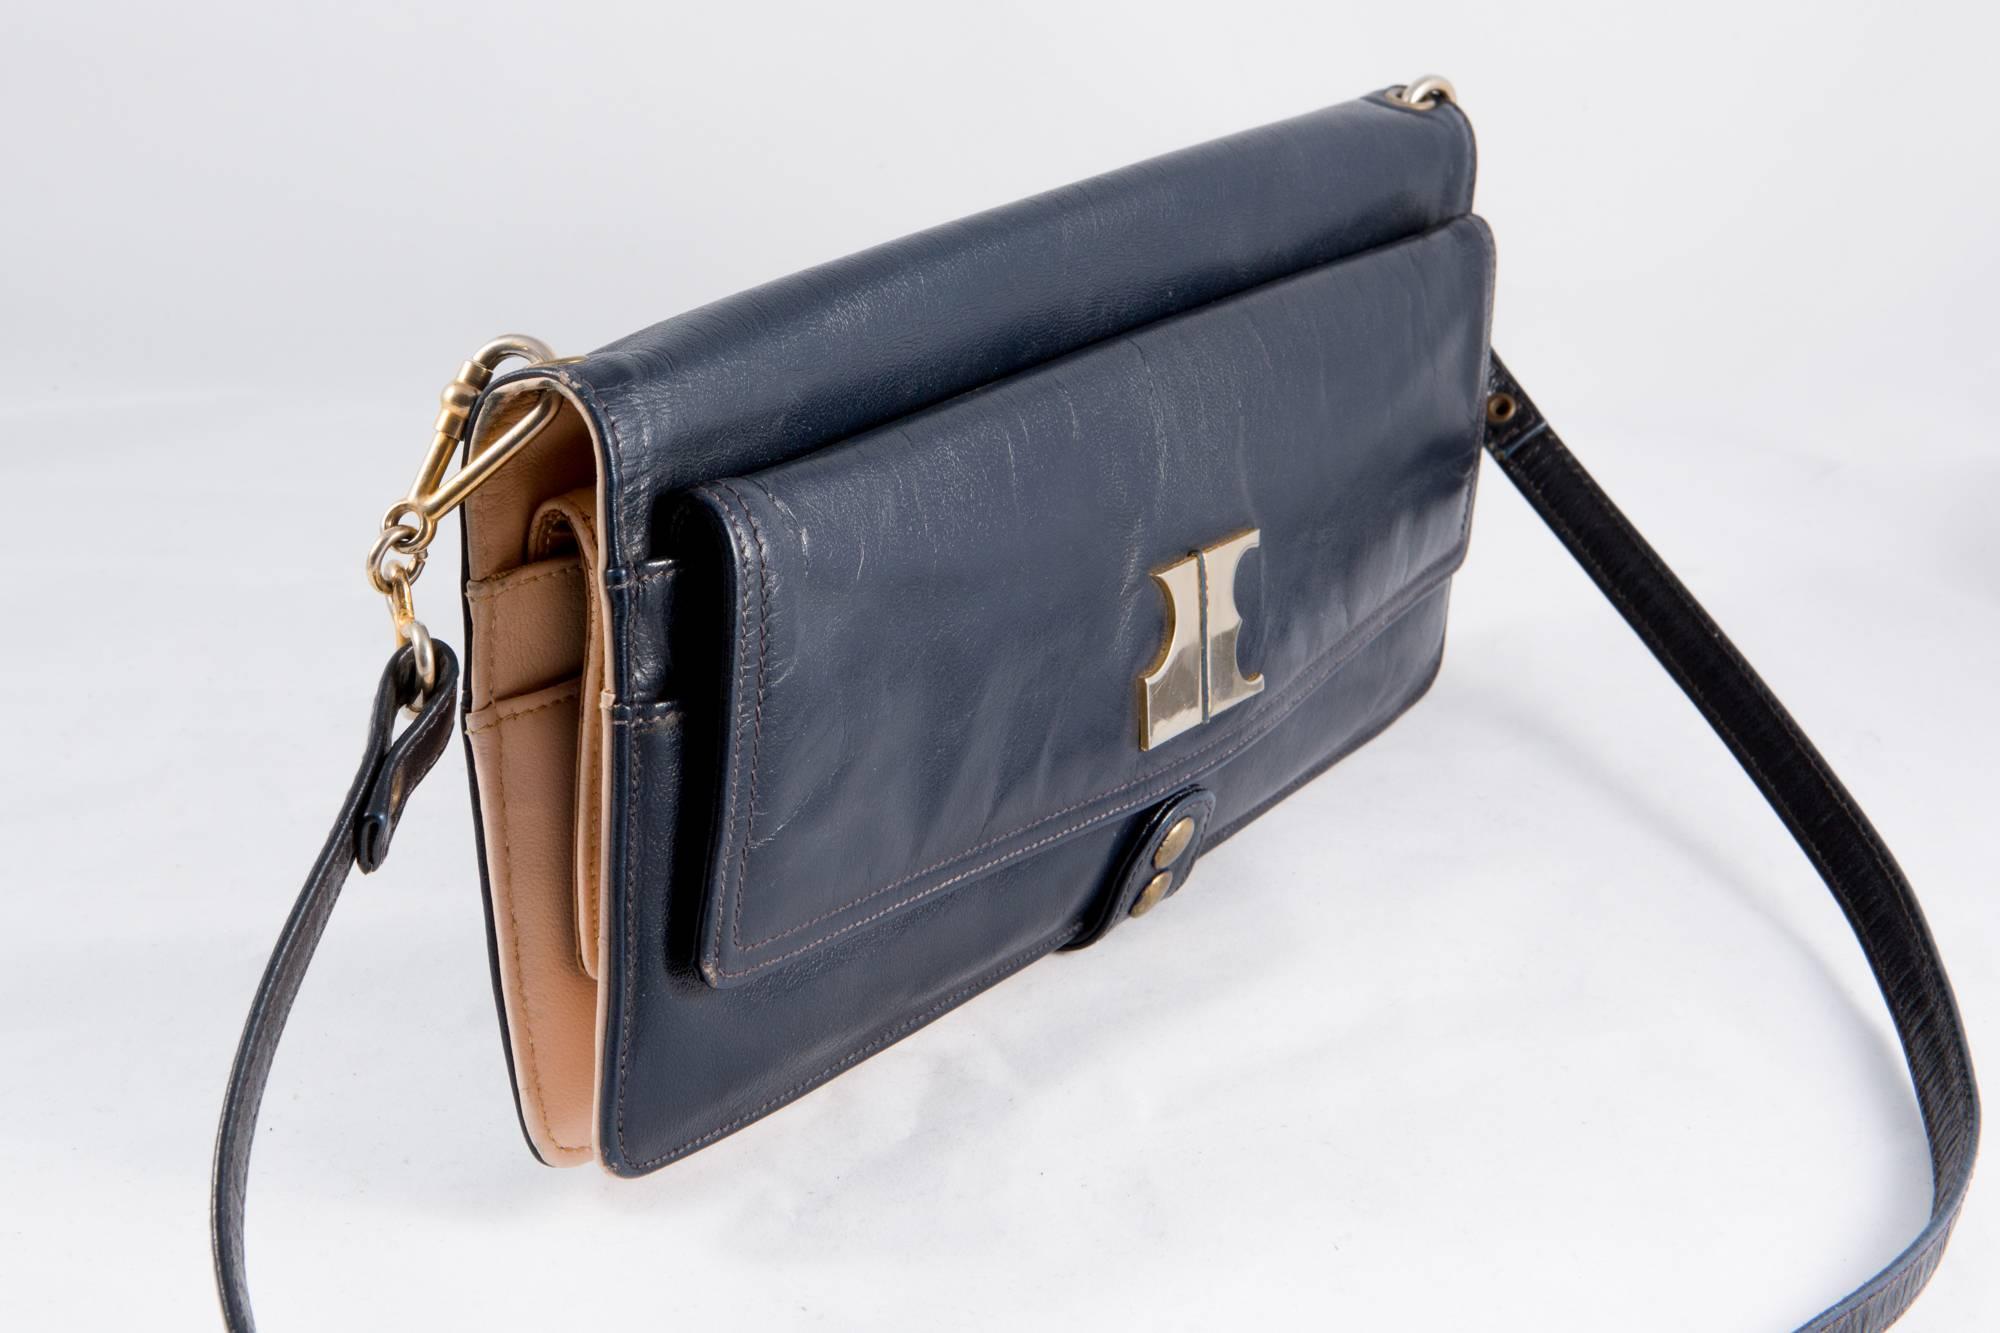 Jacques Esterel 1970s navy and cream long baguette bag featuring detachable shoulder strap with silver tone hooks, many zipped pocket, a front silver tone front logo.
In good vintage condition. 
Length 12,9 in. (33cm)
Height 5.5in. (14cm)
Shoulder